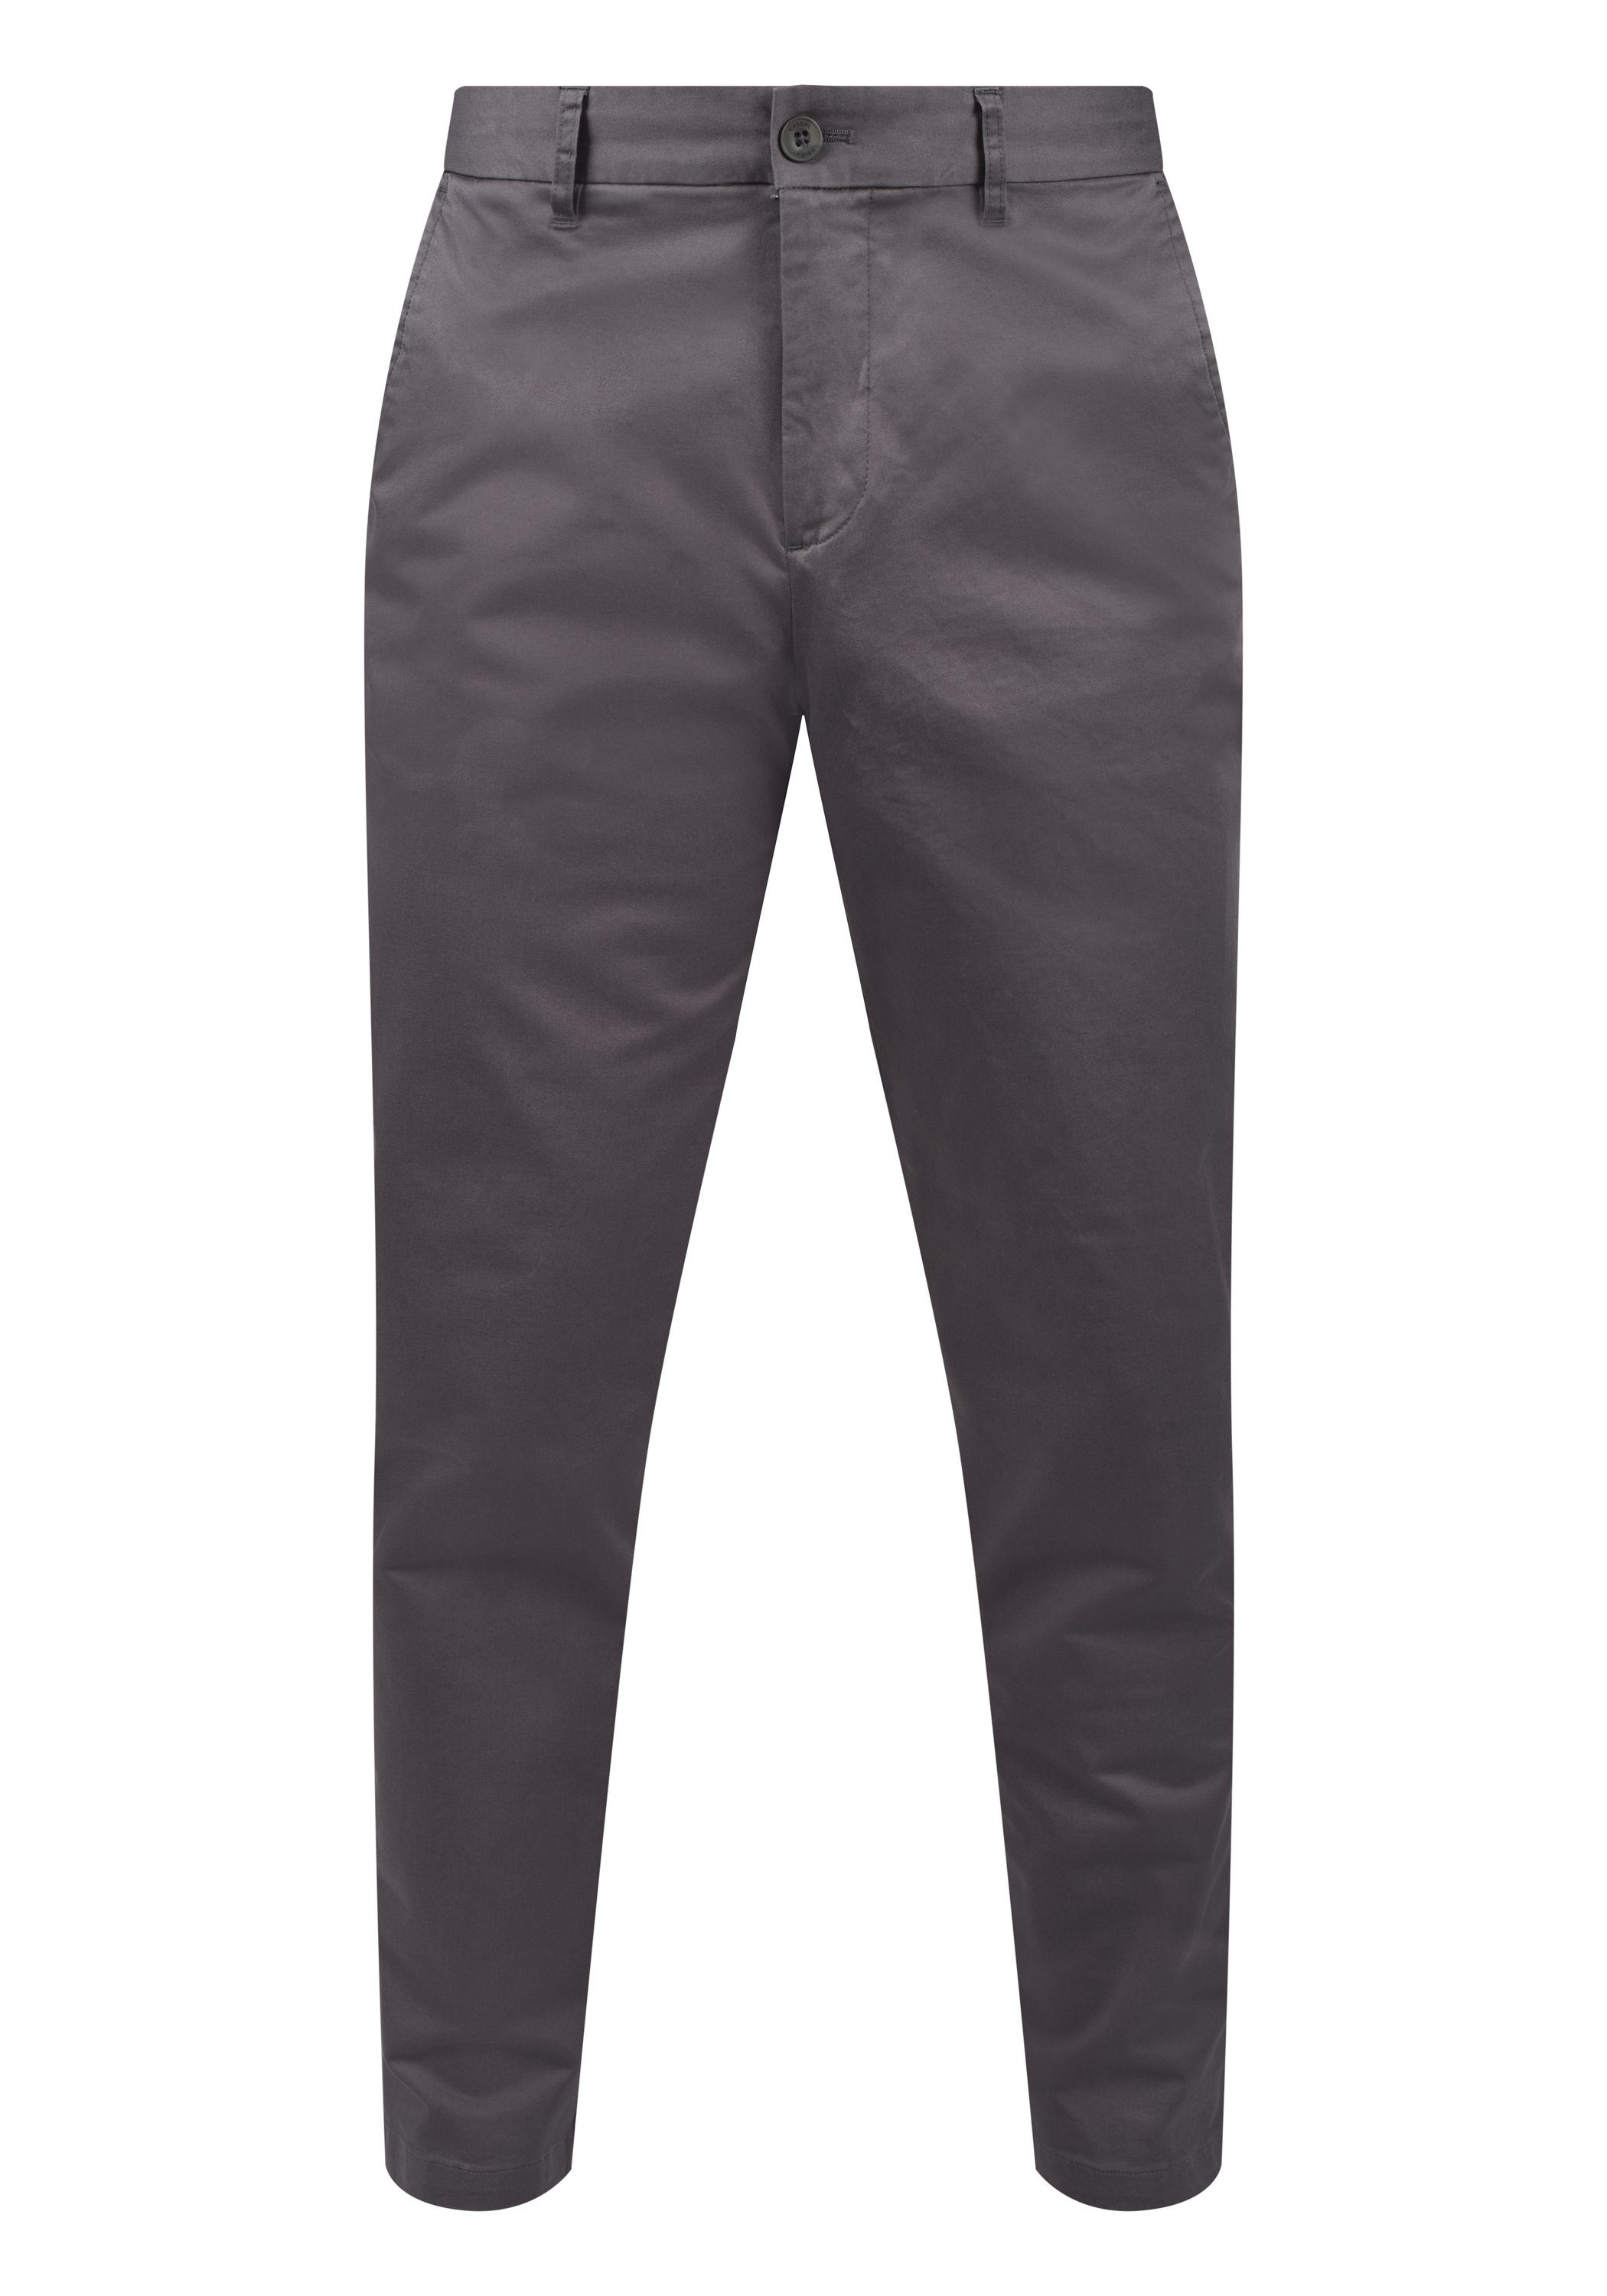 Friday Hose - (50108) Chinohose Smoked 20503245 Chino-Stil Casual grey im CFPelle lange Pearl